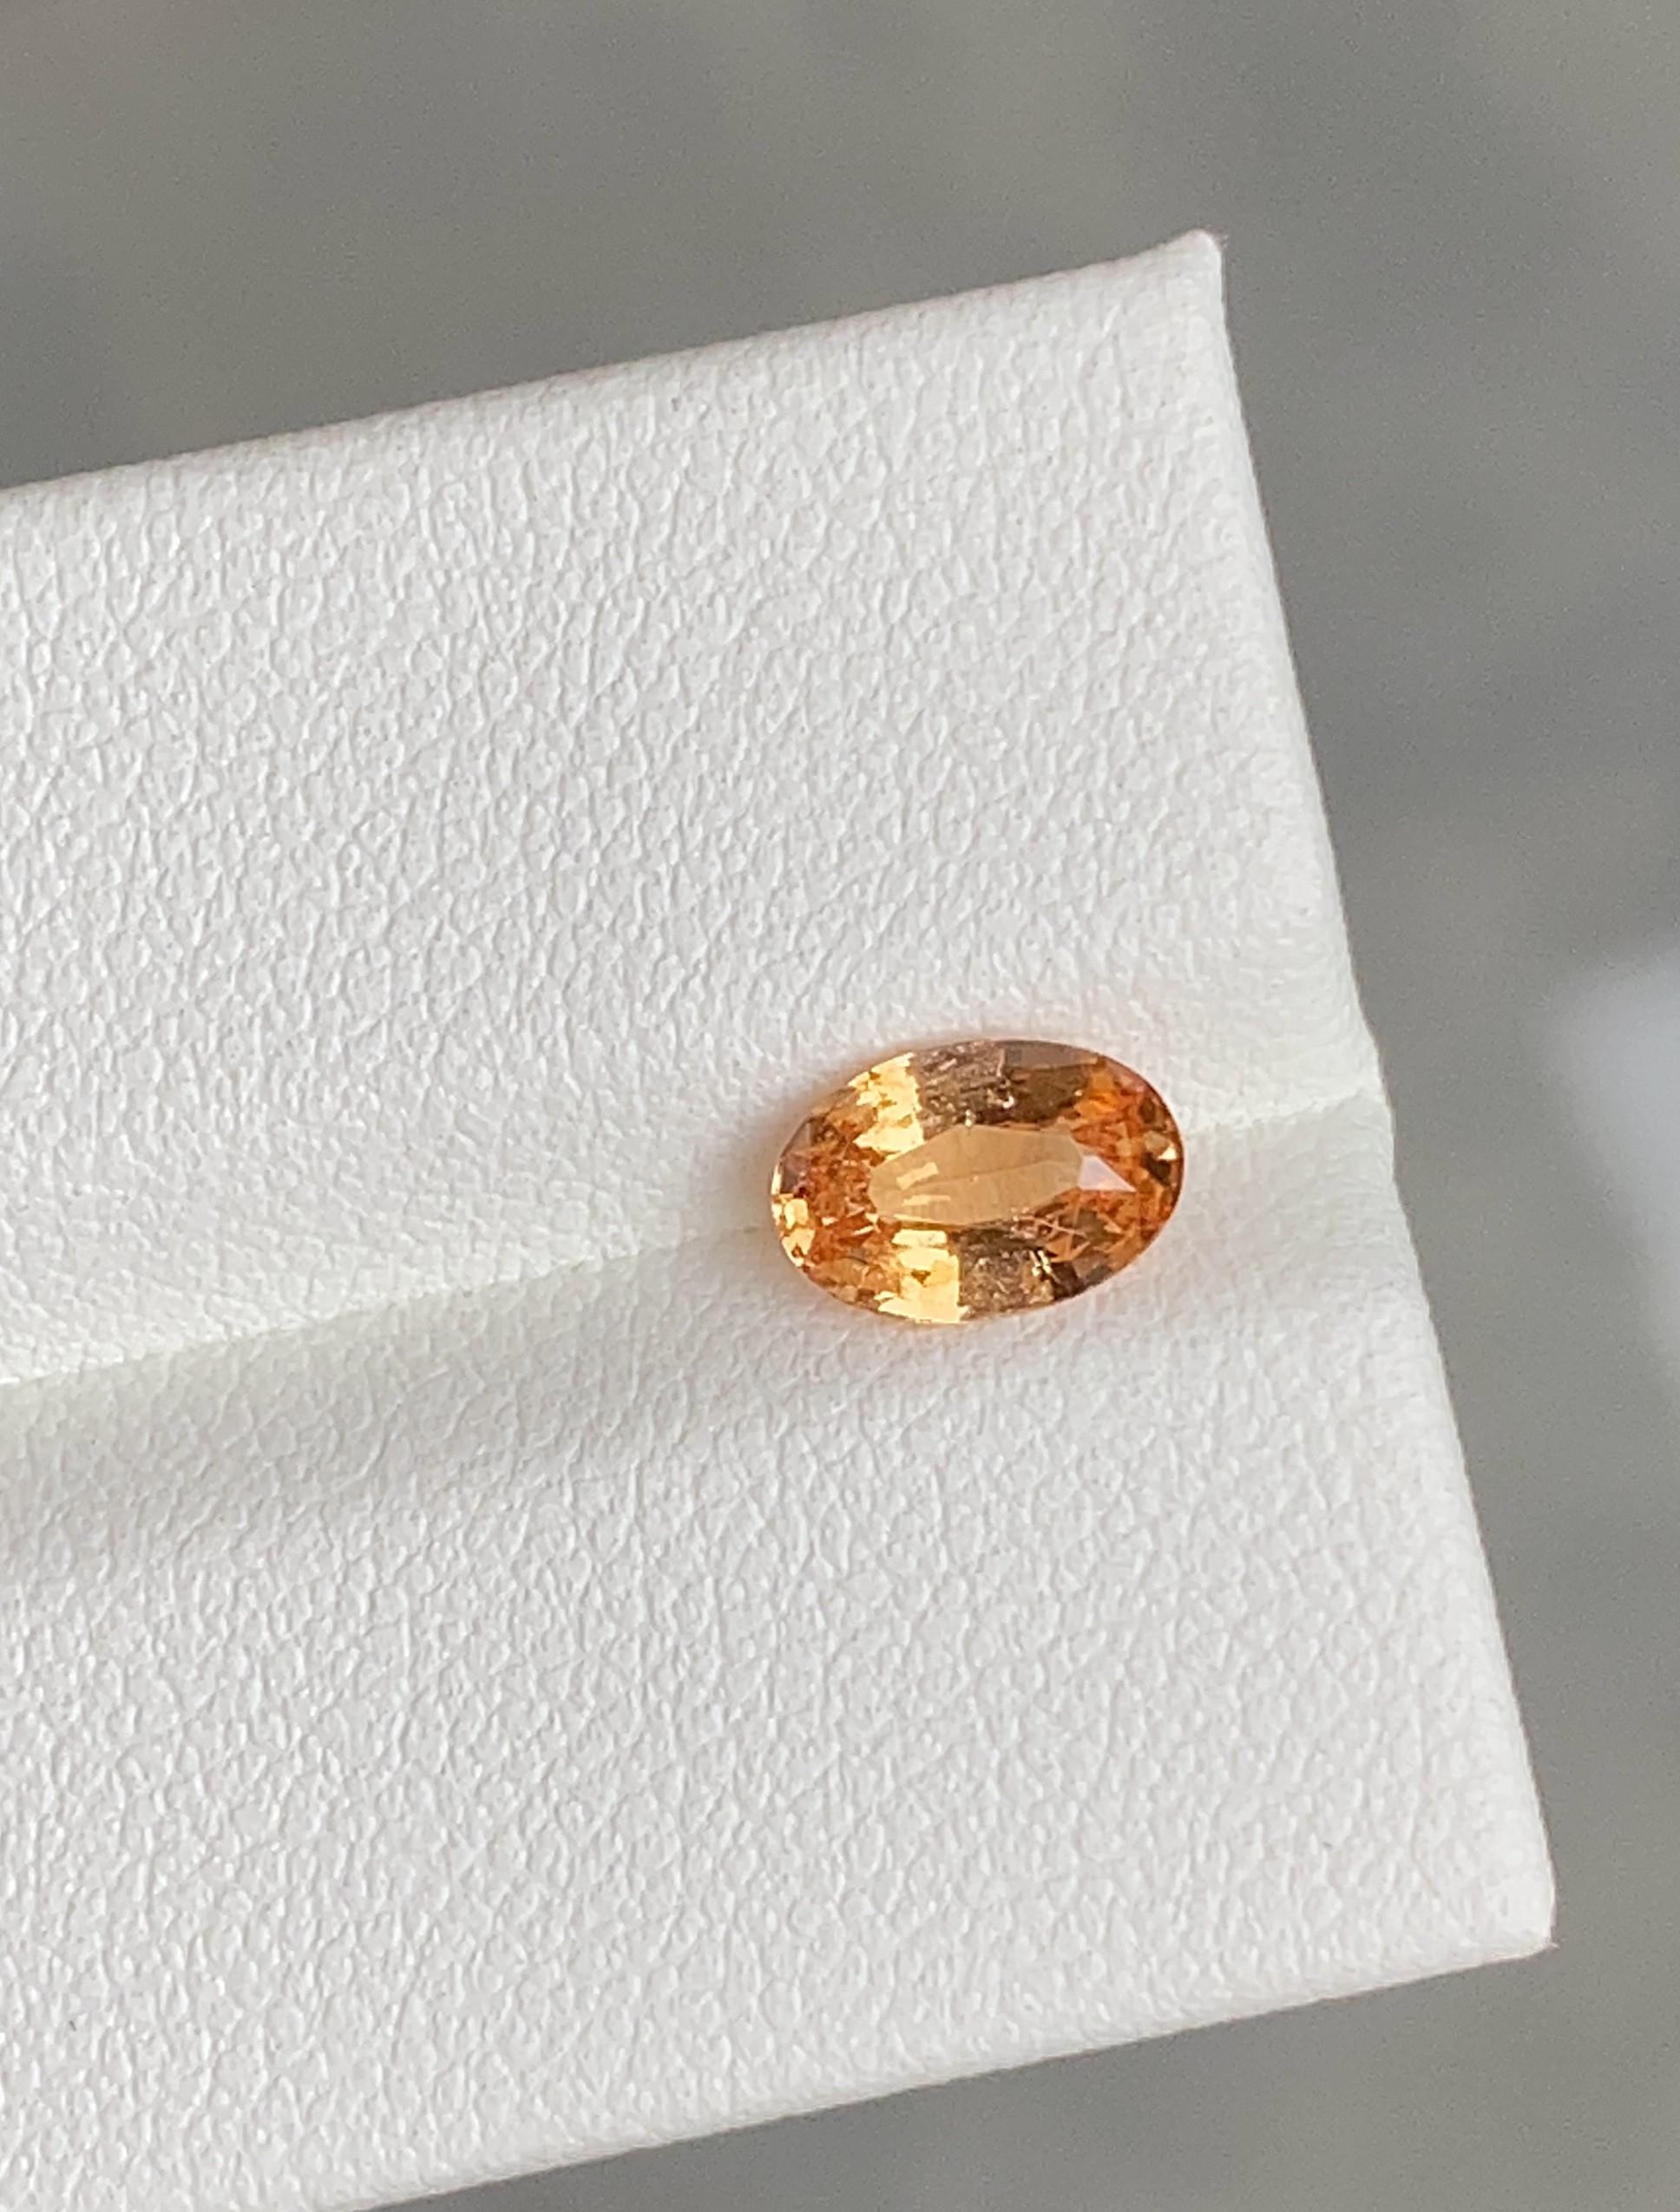 Natural Padparadscha Sapphire, come with a Sunset Peach Color with Golden hues and luster and perfect cut, unheated

• Variety: Sapphire 
• Origin: Sri Lanka (Ceylon)
• Color(s): Sunset Peach Color
• Shape/Cutting Style: oval
• Dimensions: 6.5mm x